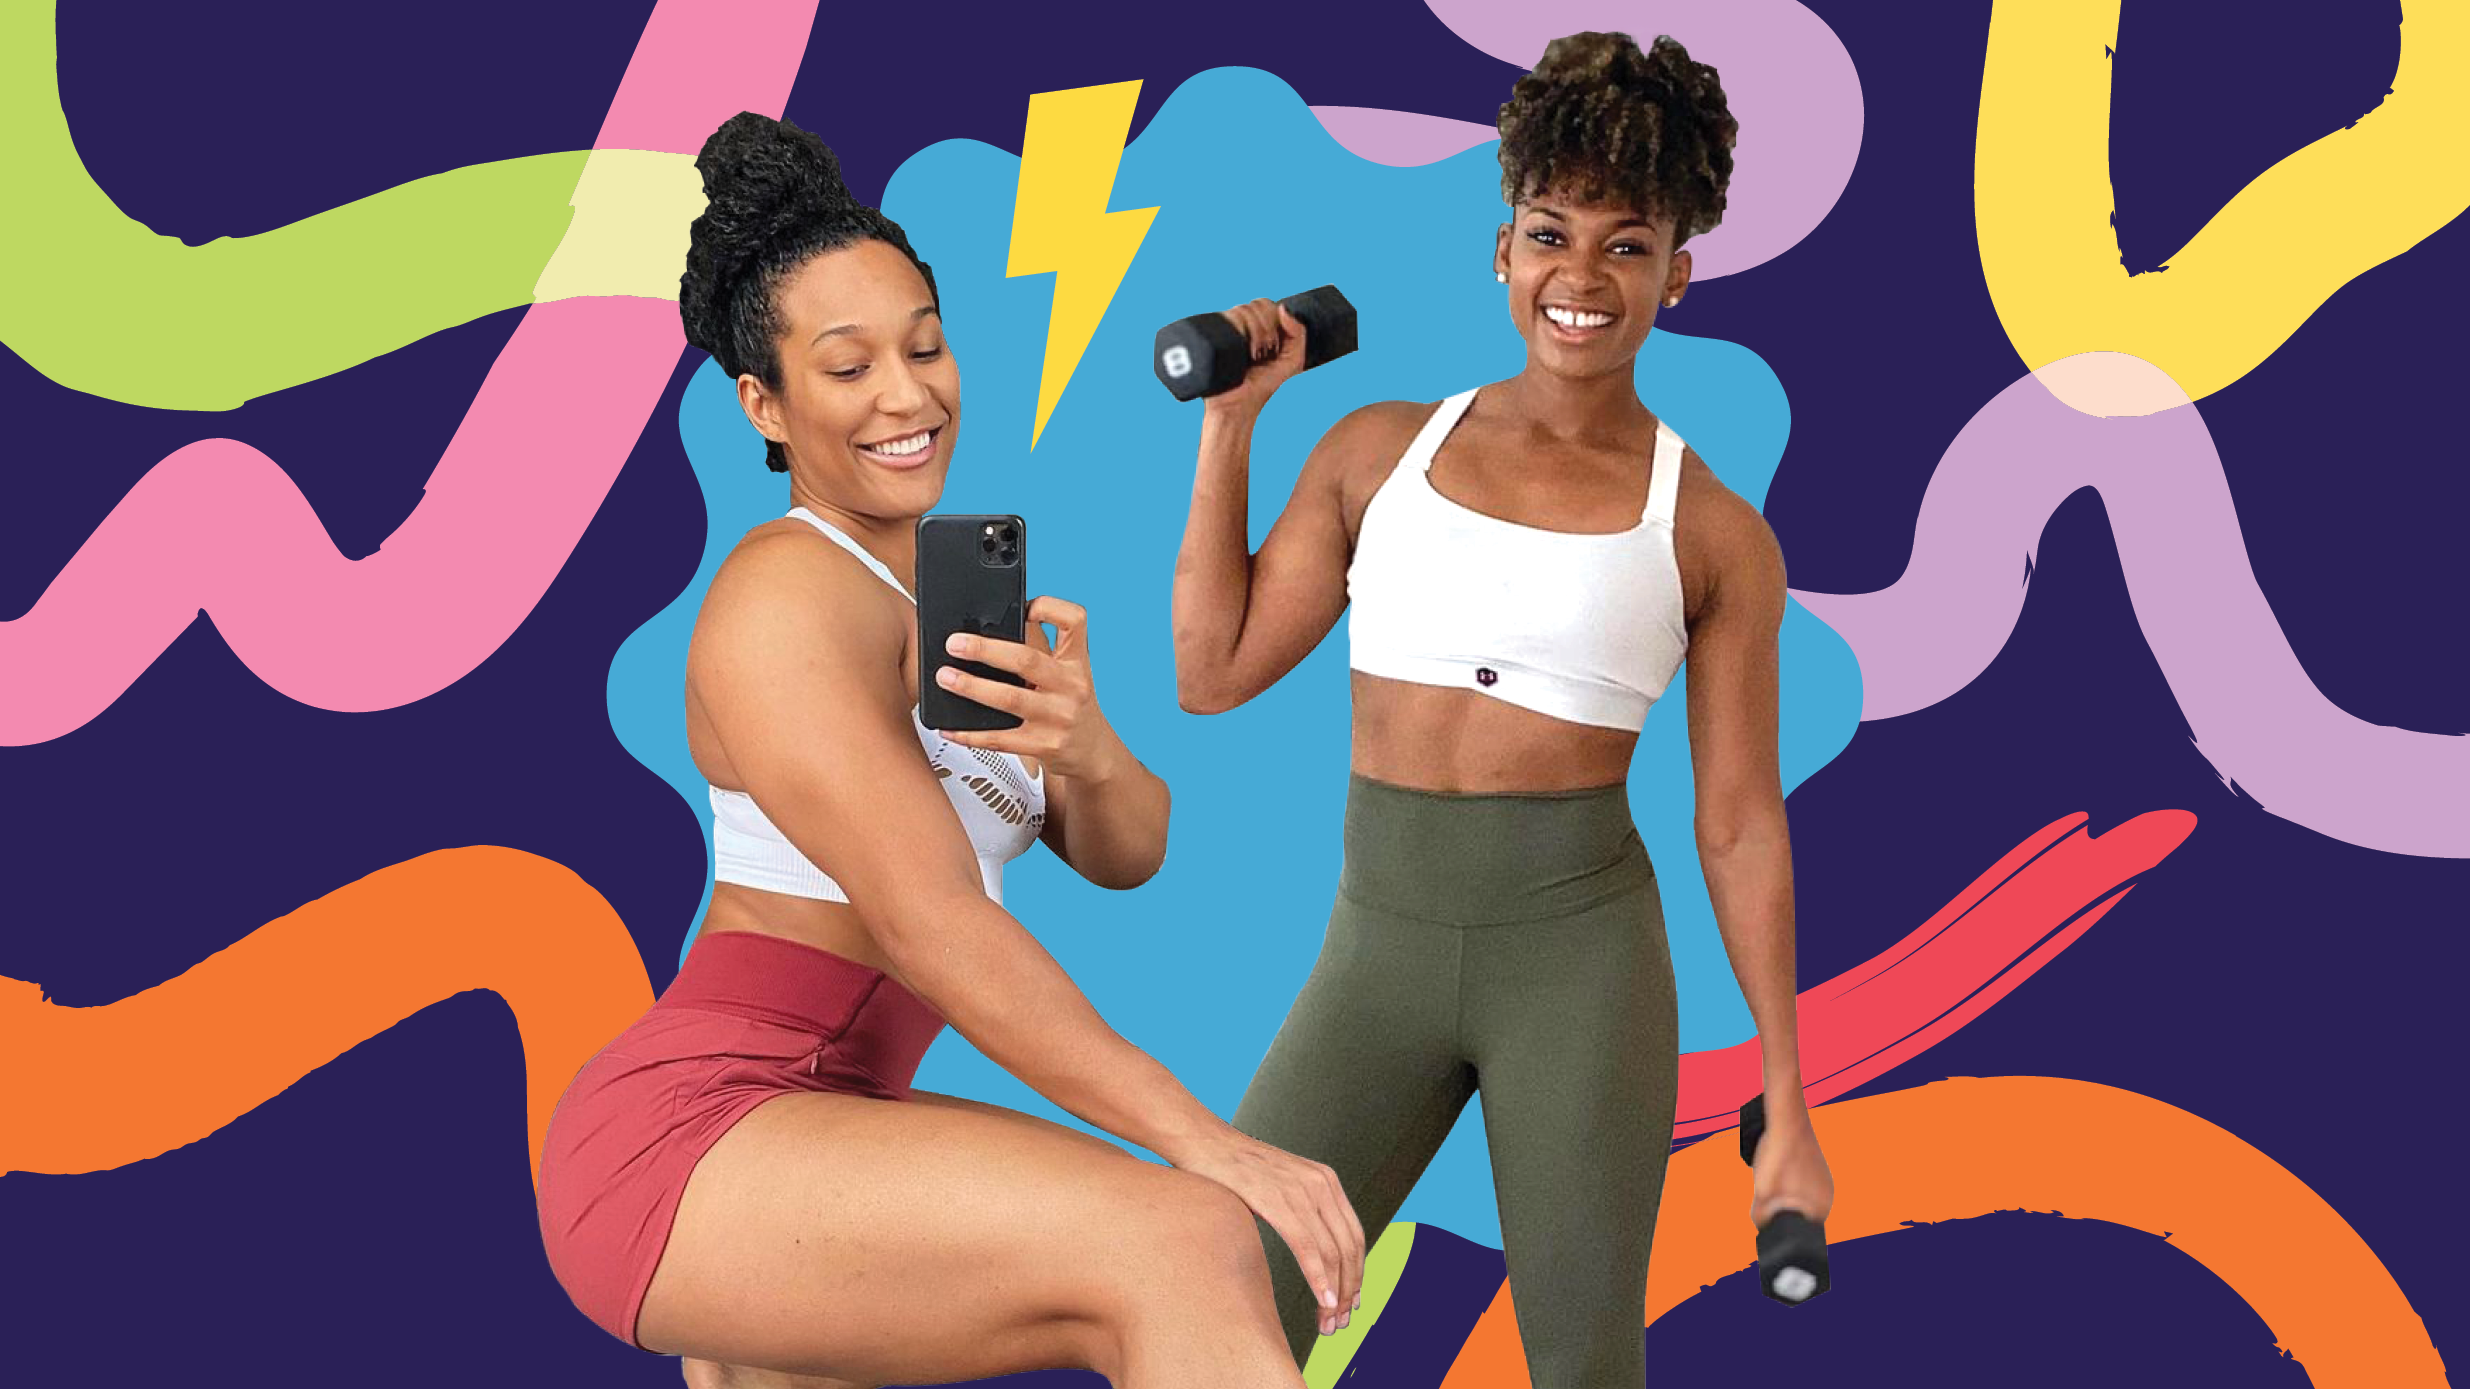 https://hips.hearstapps.com/hmg-prod/images/wh-fitness-trainers-1612304593.png?crop=0.888888888888889xw:1xh;center,top